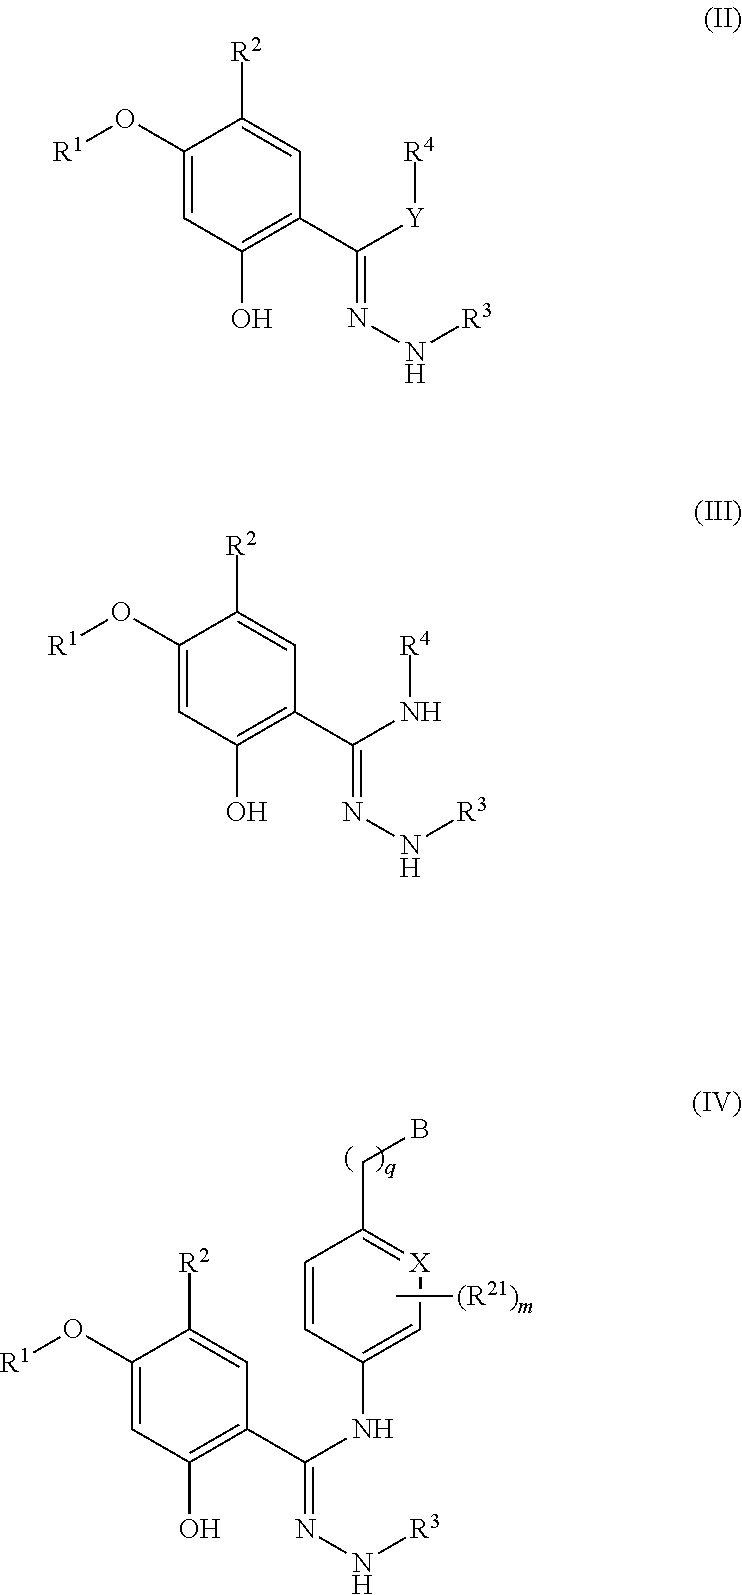 Hydrazonamide Compounds That Modulate Hsp90 Activity